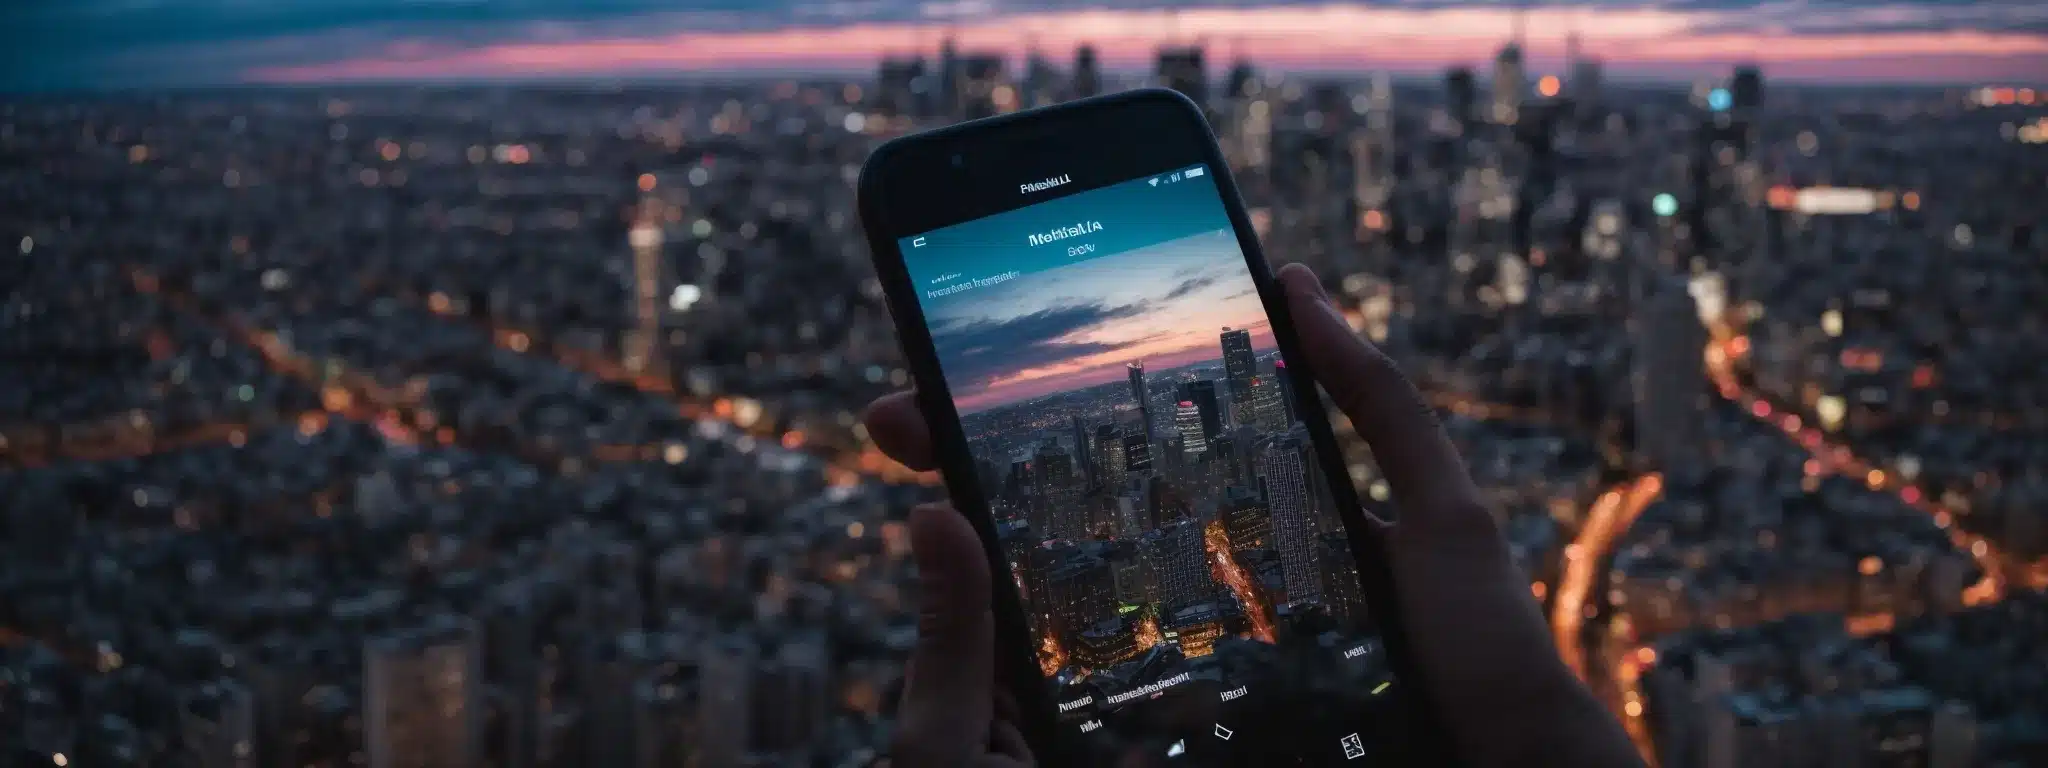 A Person Holds A Smartphone Displaying A Vibrant Social Media Feed Against A Backdrop Of A Bustling Cityscape At Twilight.